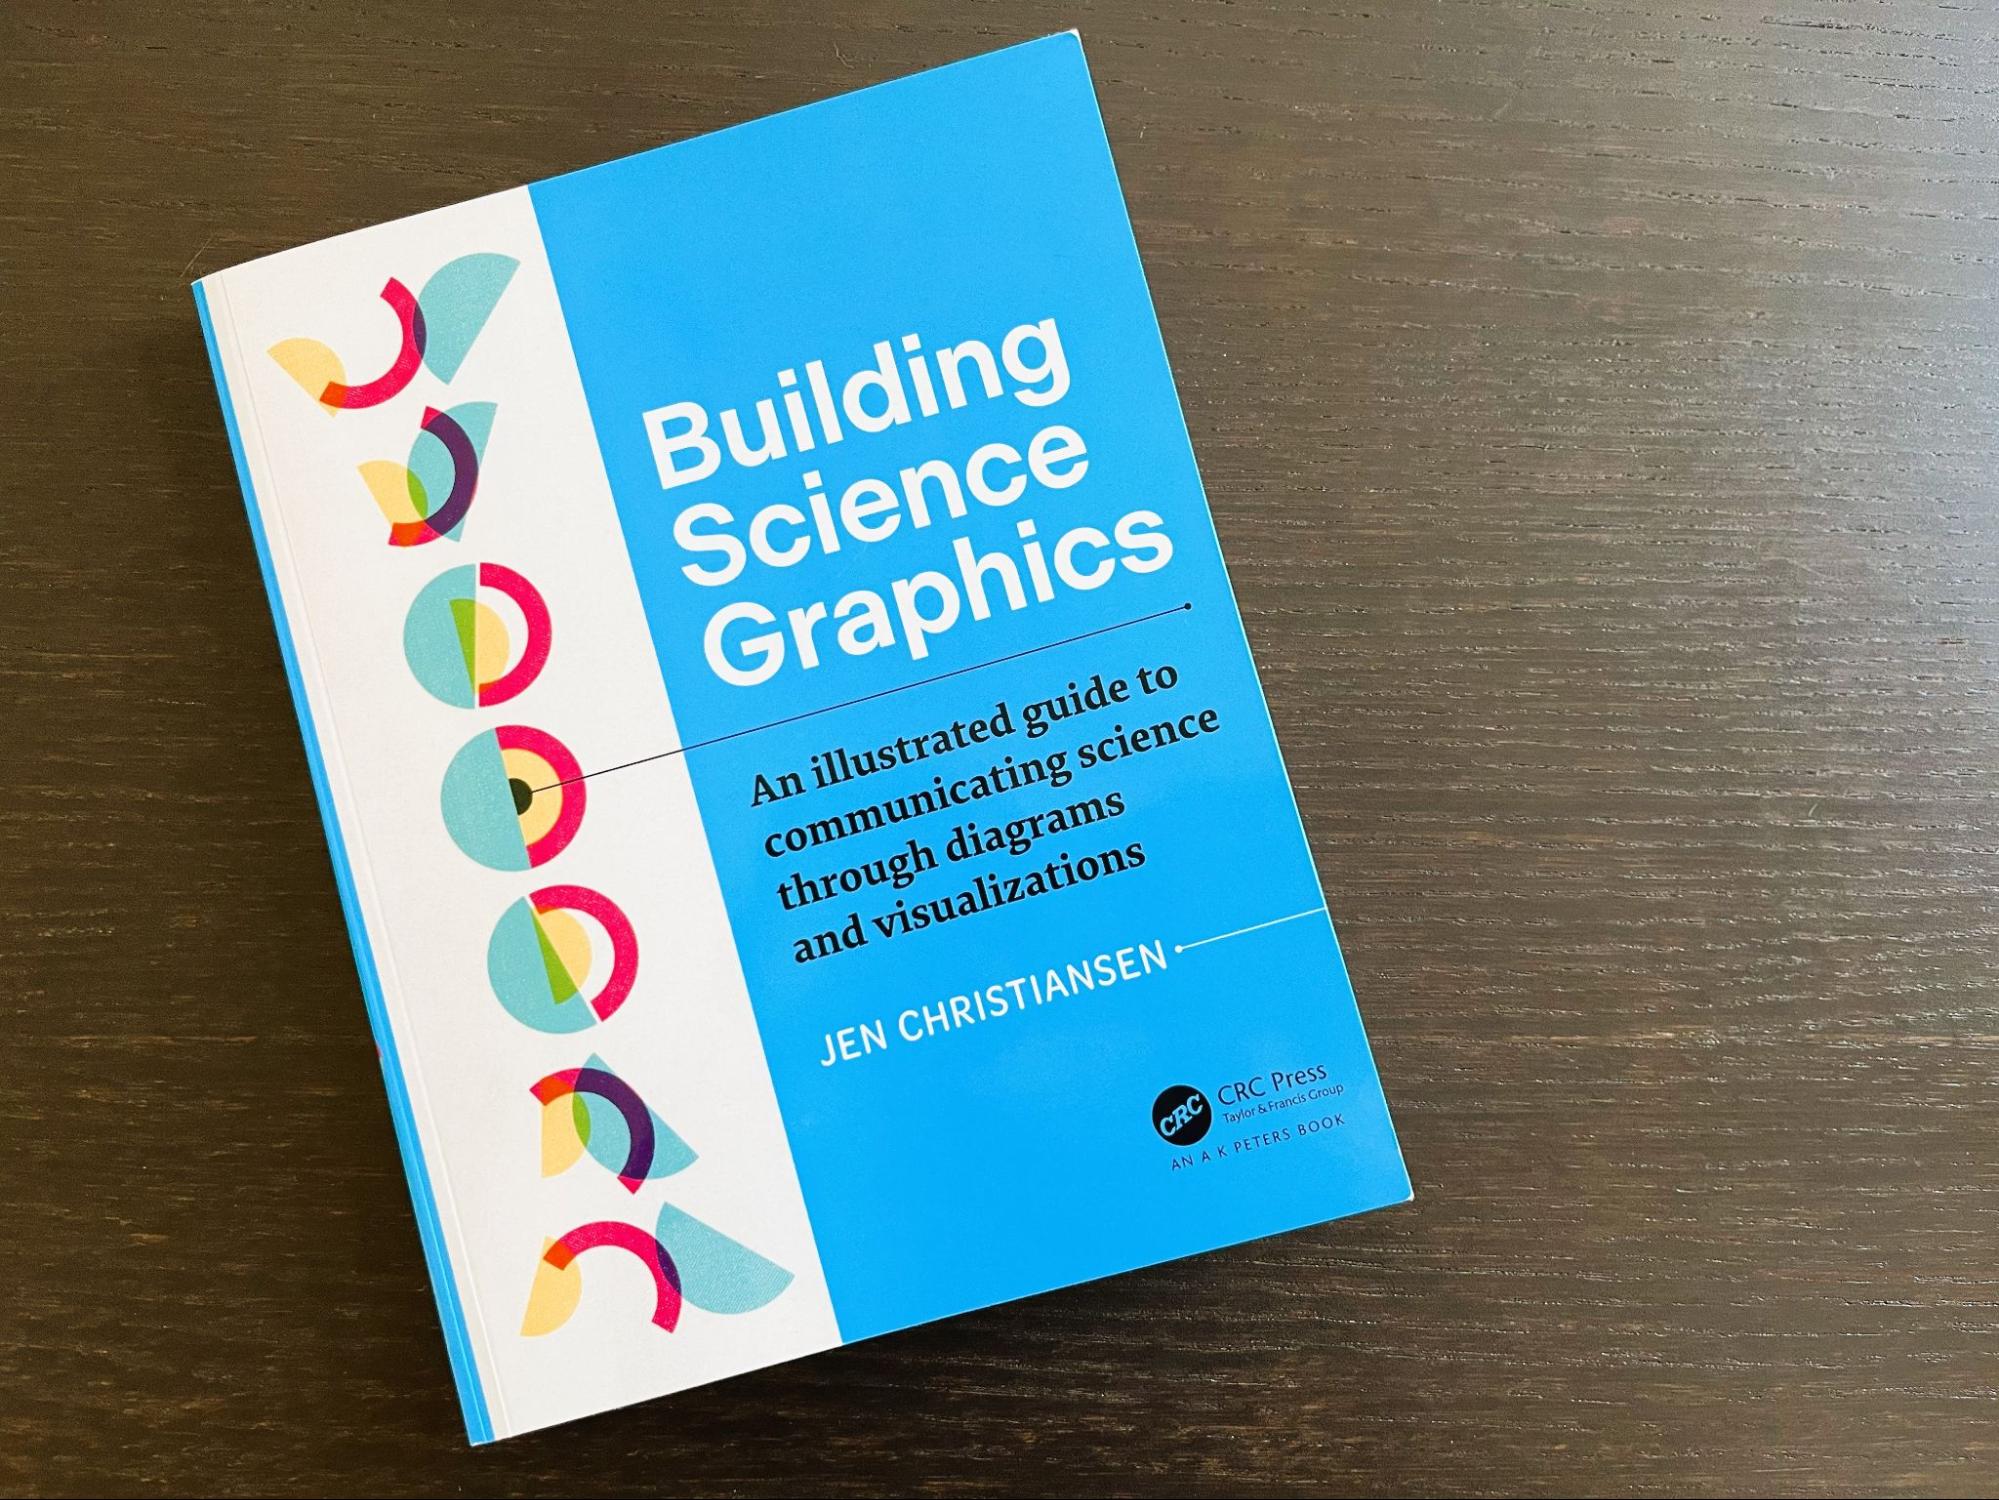 The Building Science Graphics book on a dark brown wood table. The book has a cover that is two-thirds blue and one-third white. On the white section of the cover, a series of overlapping half circles in yellow, pink, and blue are shown in varying degrees of rotation in a vertical arrangement.